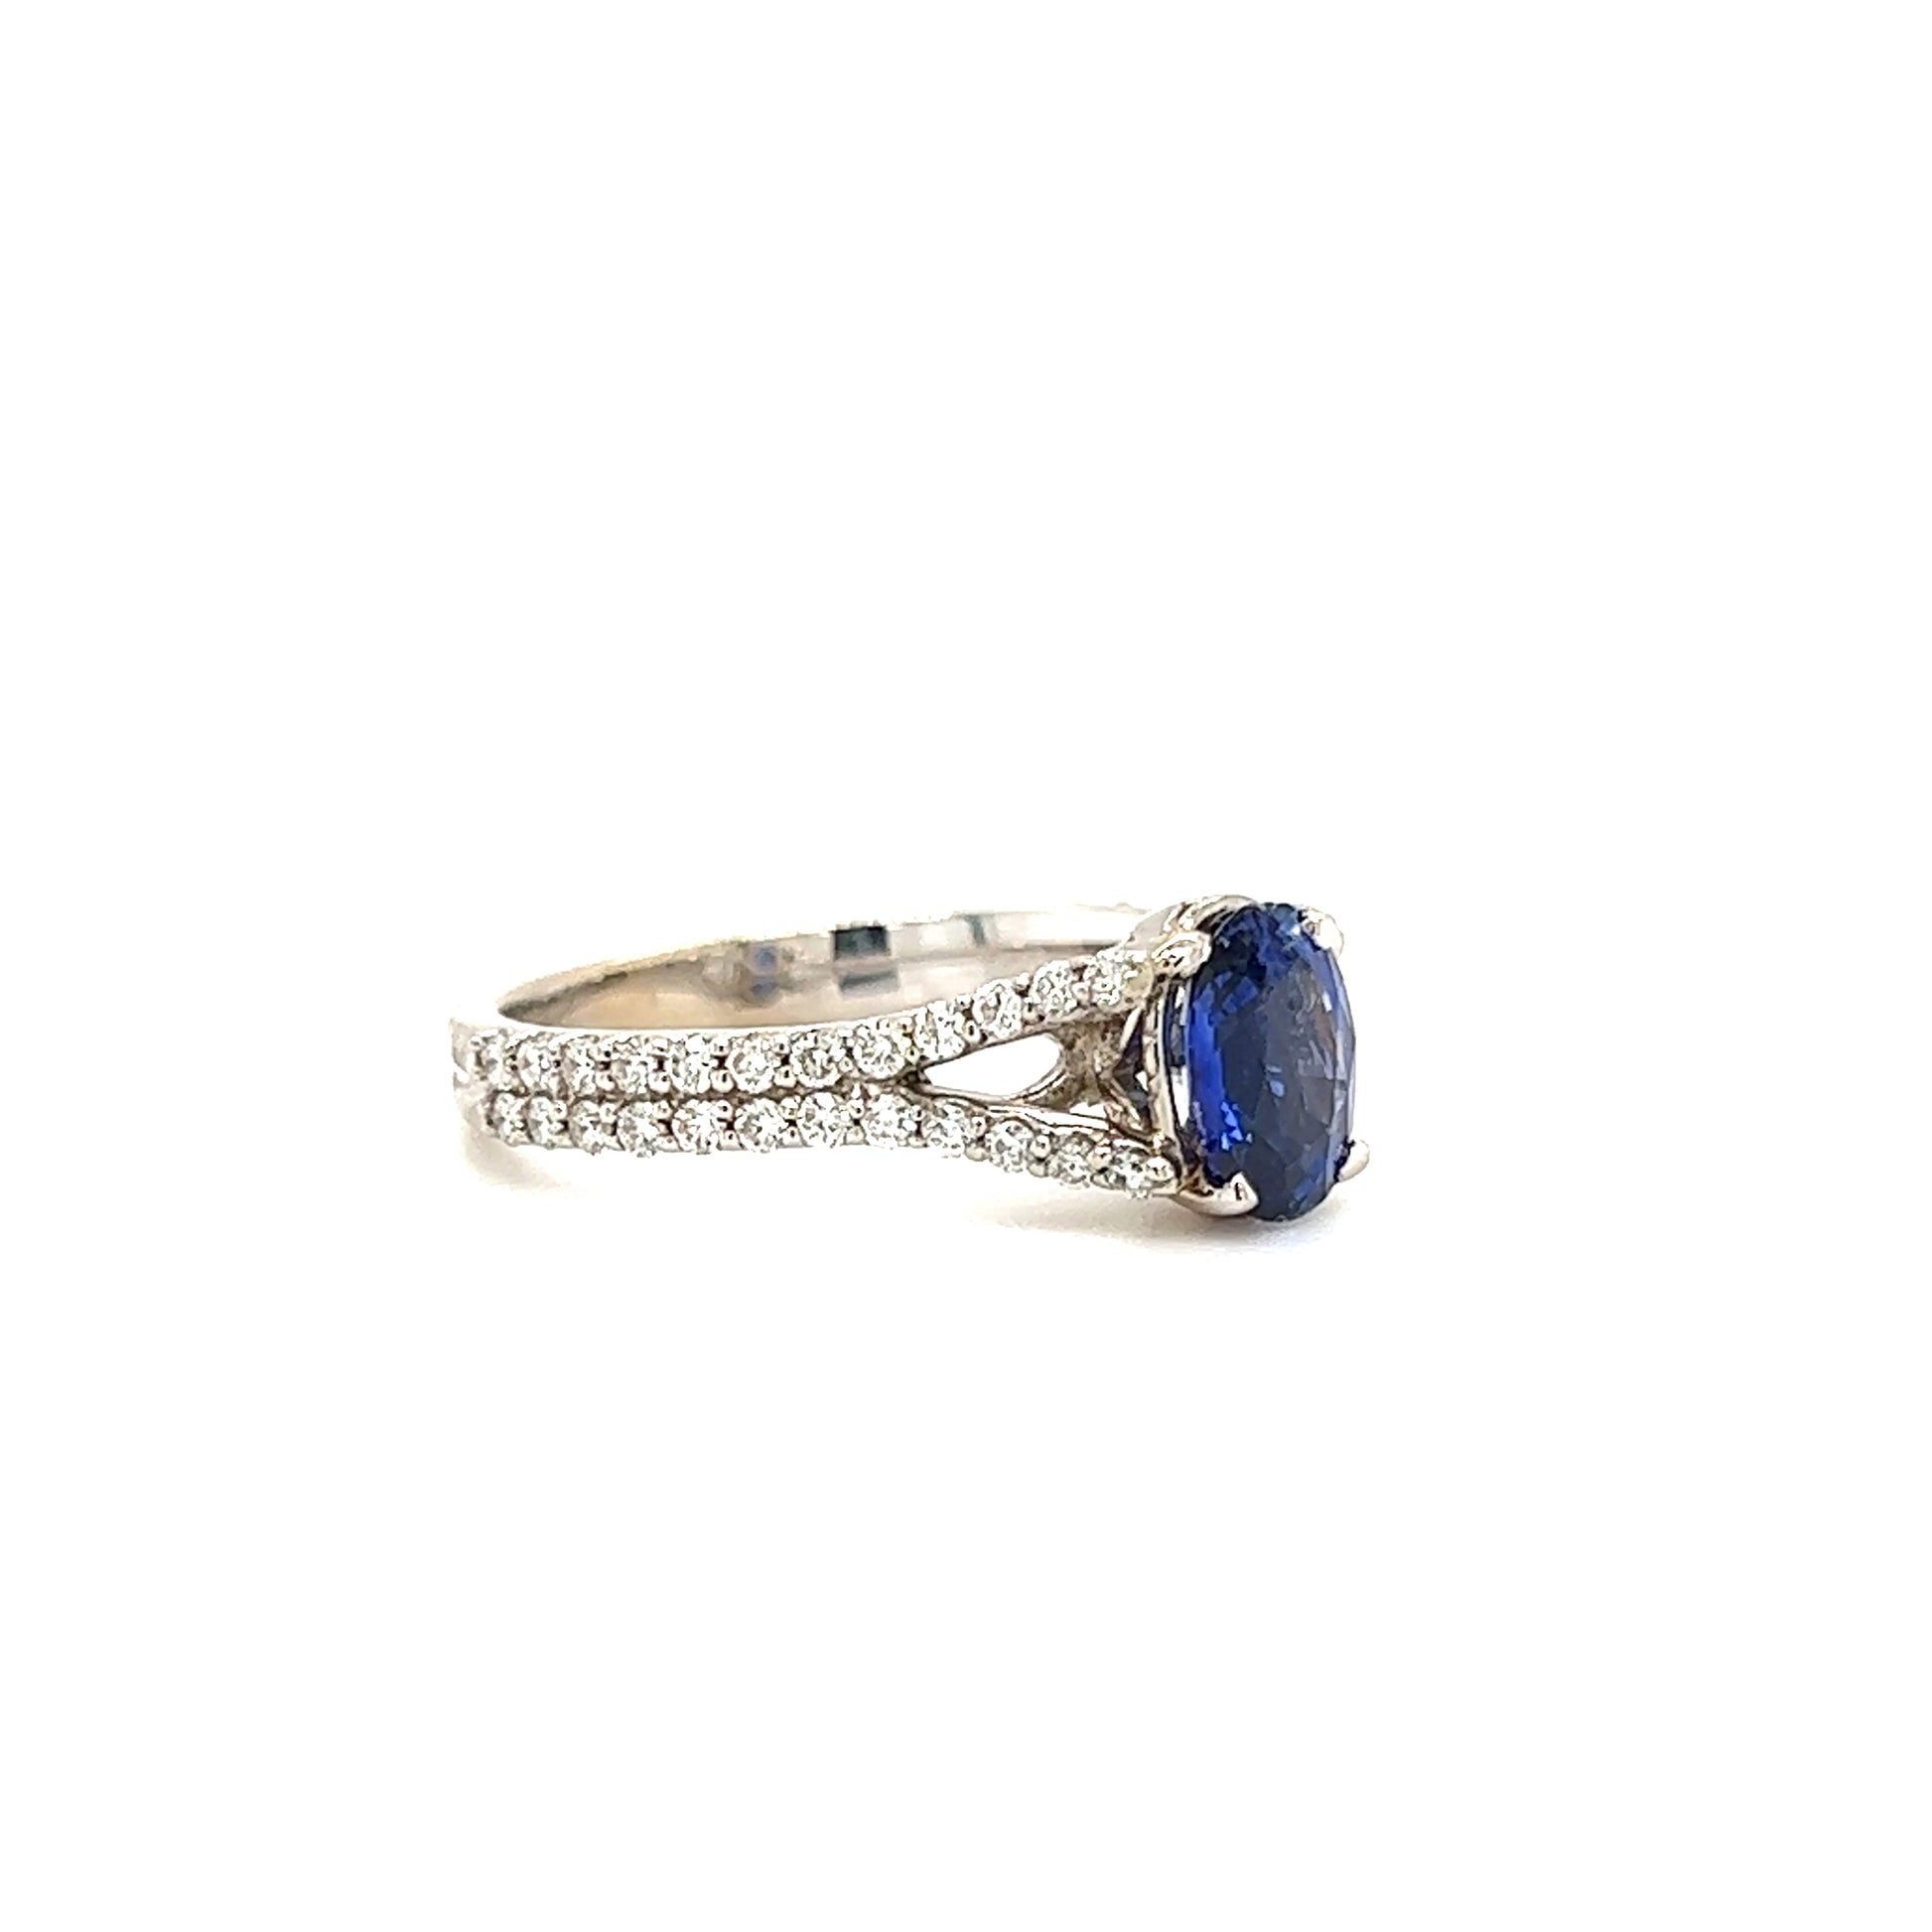 Oval Blue Sapphire Ring with Split Diamond Shank in 14K White Gold Right Profile View